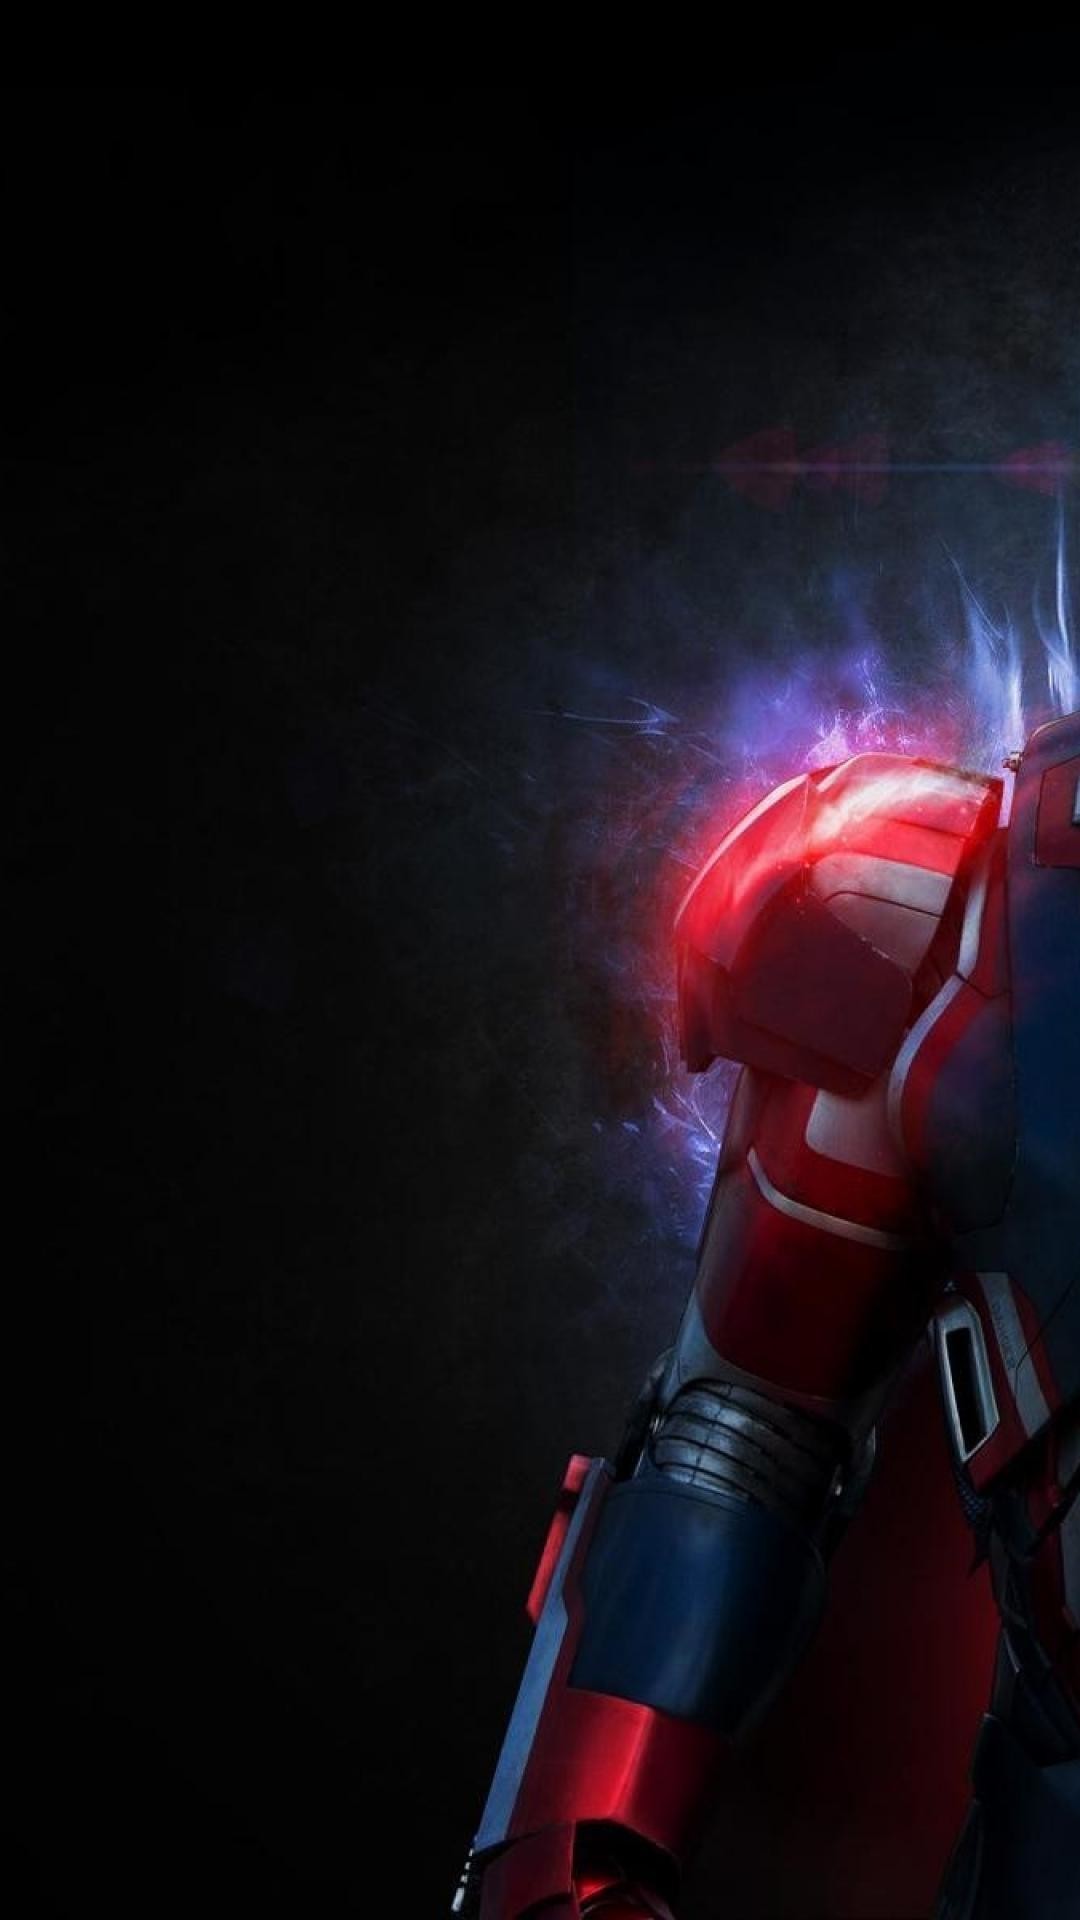 Hd Wallpaper Of Iron Man For Mobile